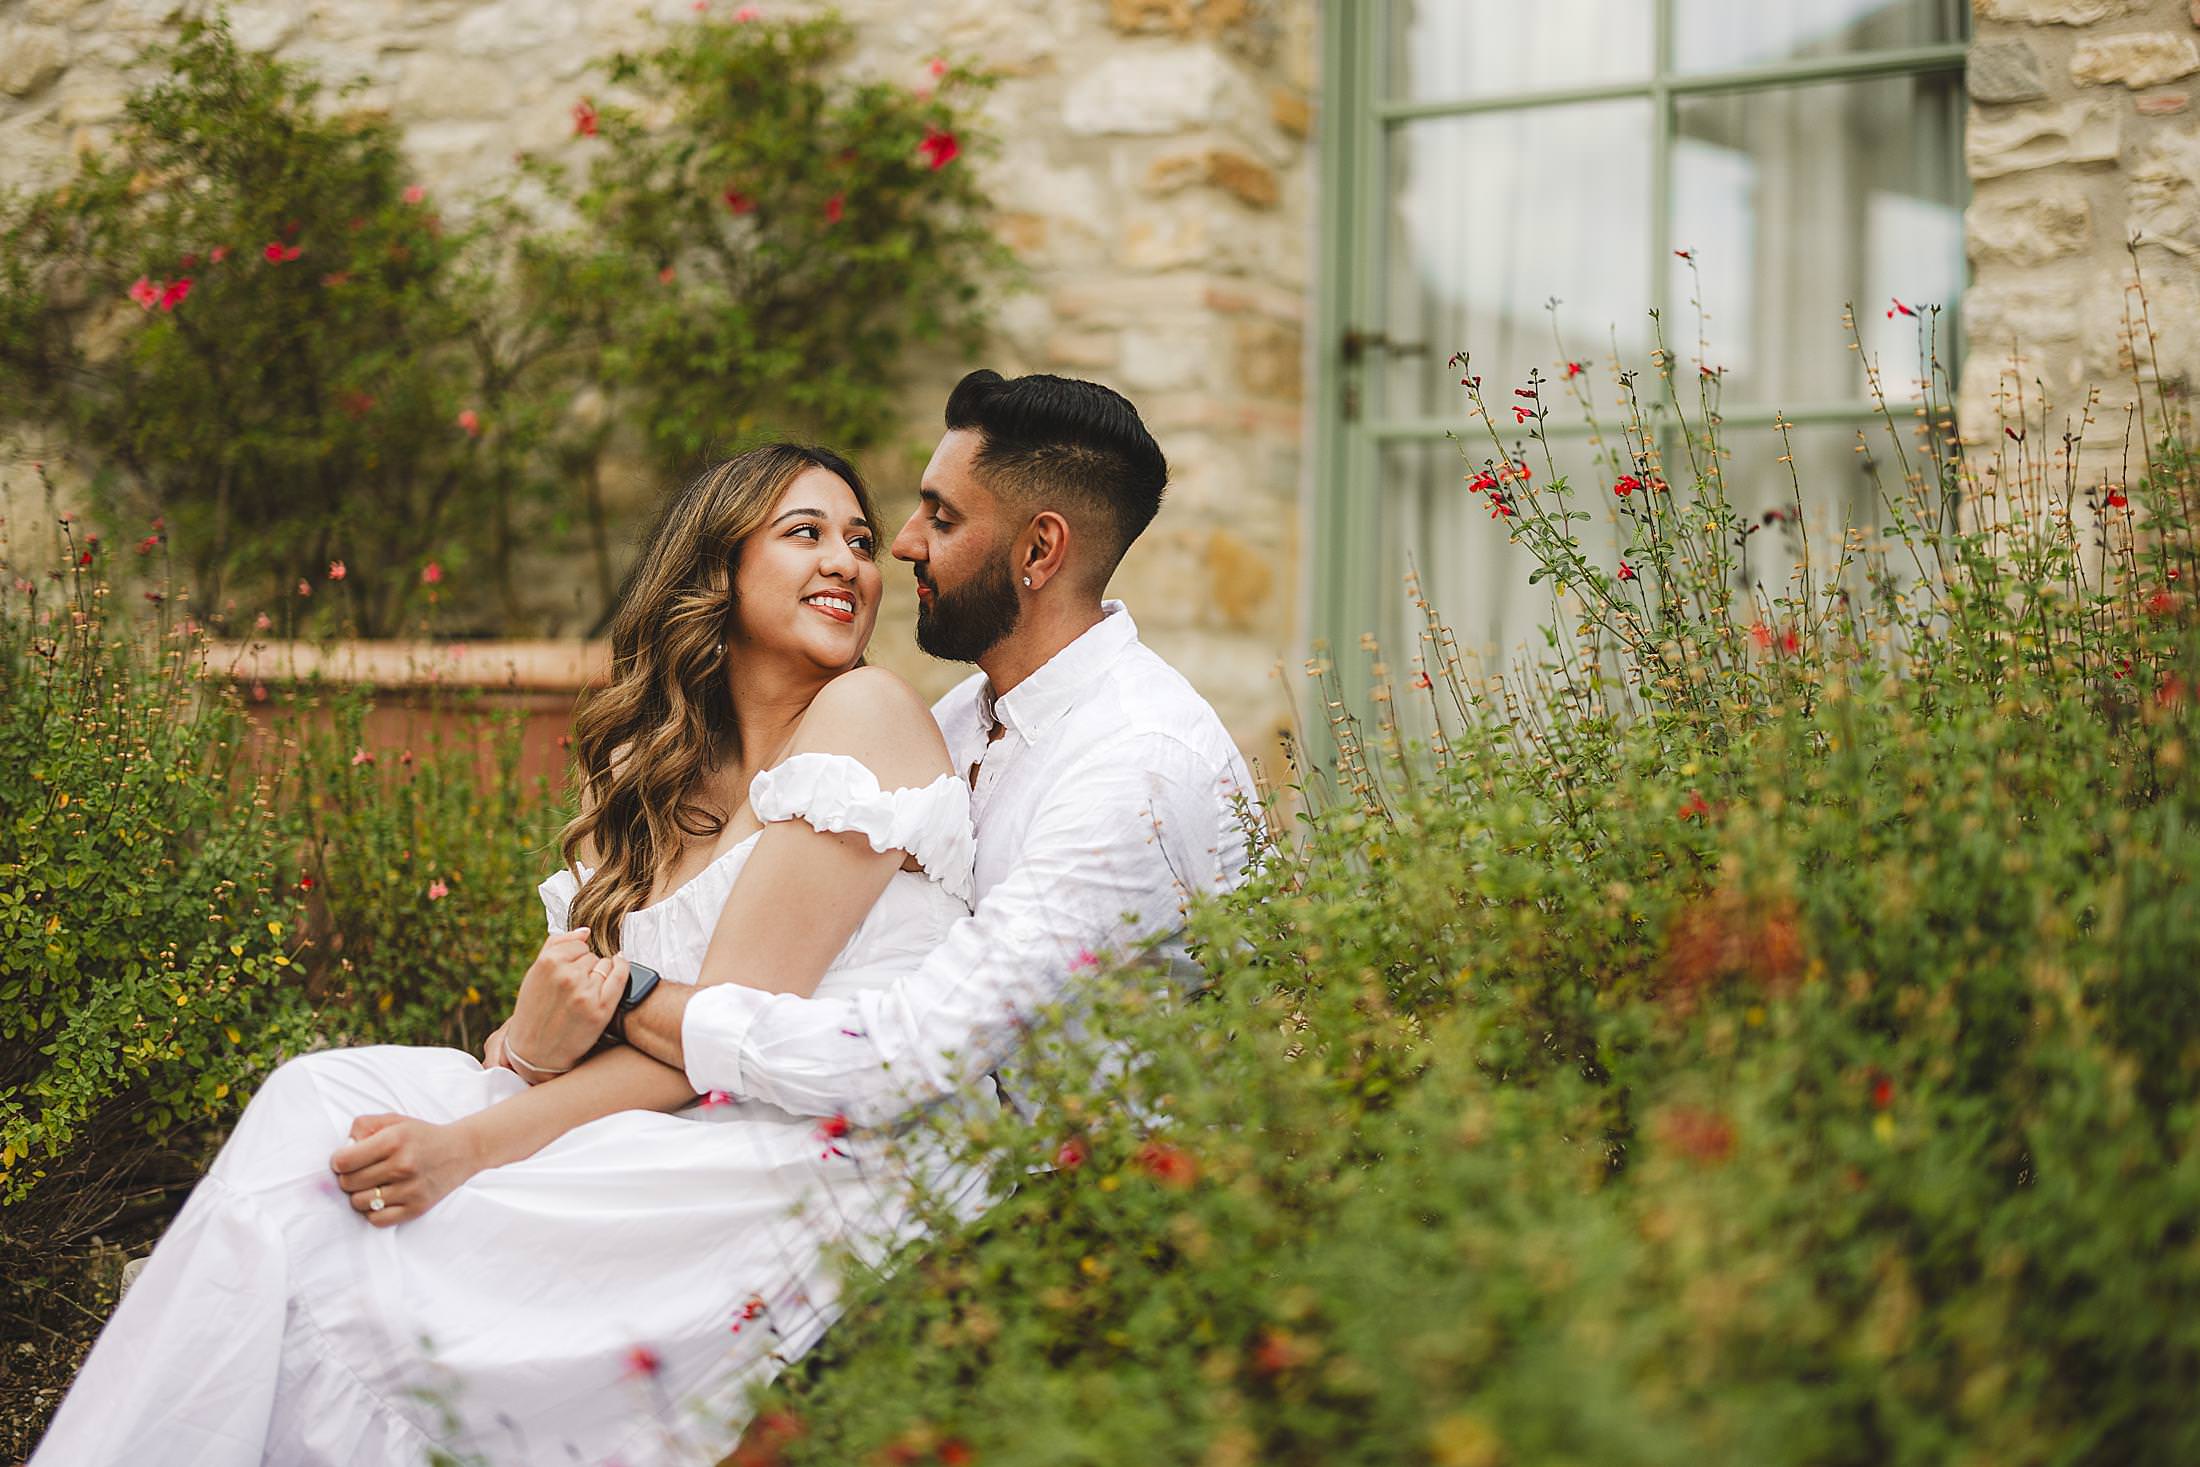 Romantic and lovely couple engagement session at Borgo del Cabreo charming venue